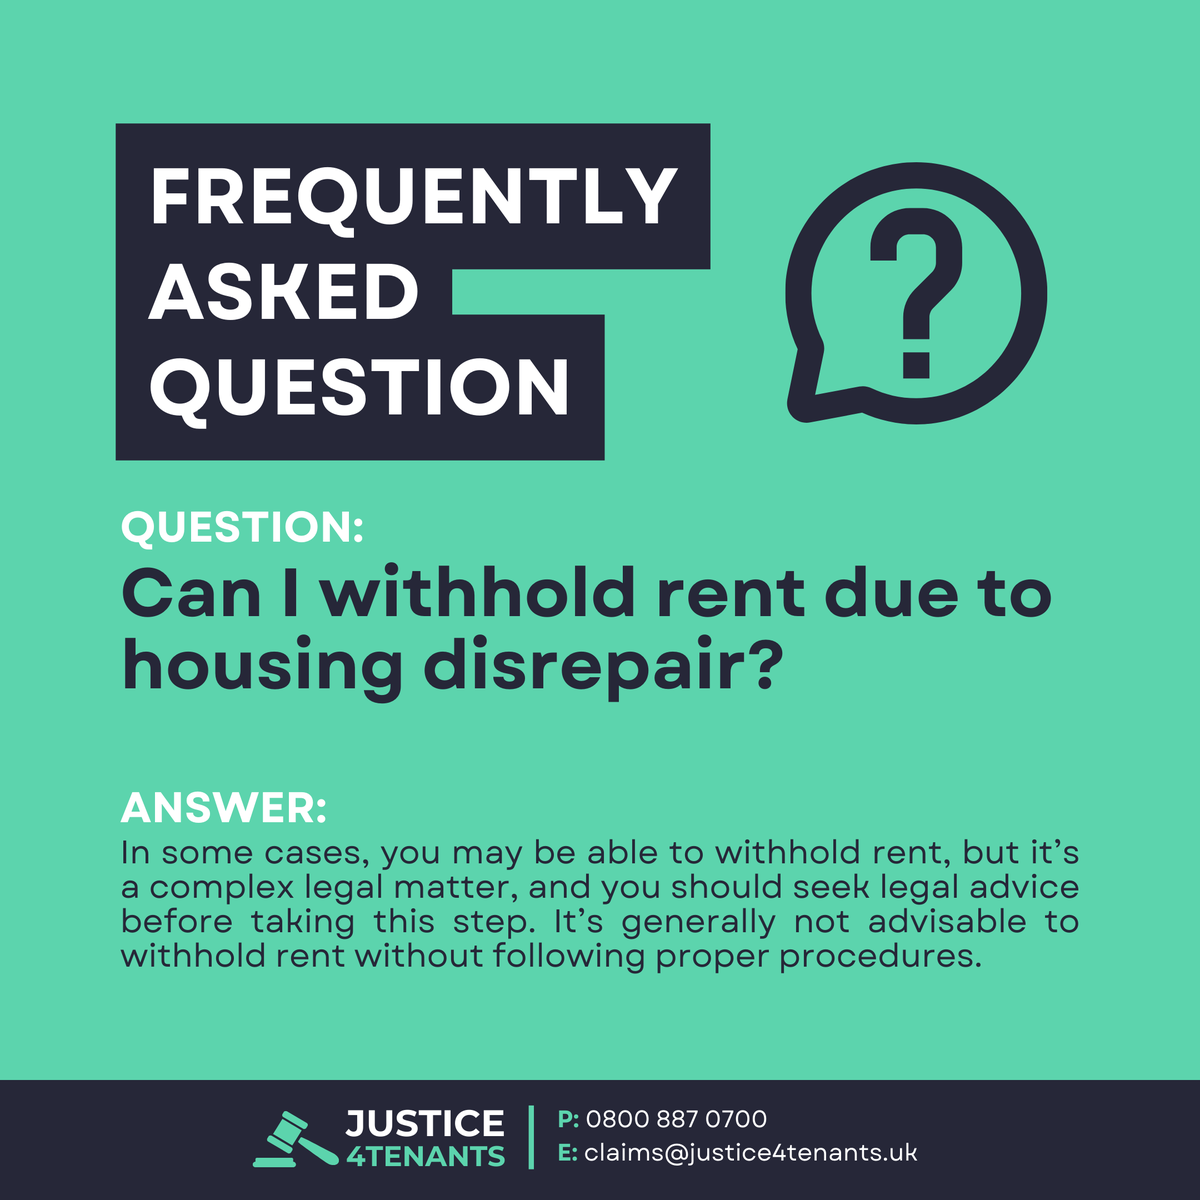 Q: Can I withhold rent due to housing disrepair?

For assistance with your housing disrepair issues, Call us FREE today on 0800 887 0700 or email us on claims@justice4tenants.uk

#HousingDisrepair #Just4Tenants #UKHousing #UKRenting #RentingInUK #TenantUK #HousingUK #UKProperty